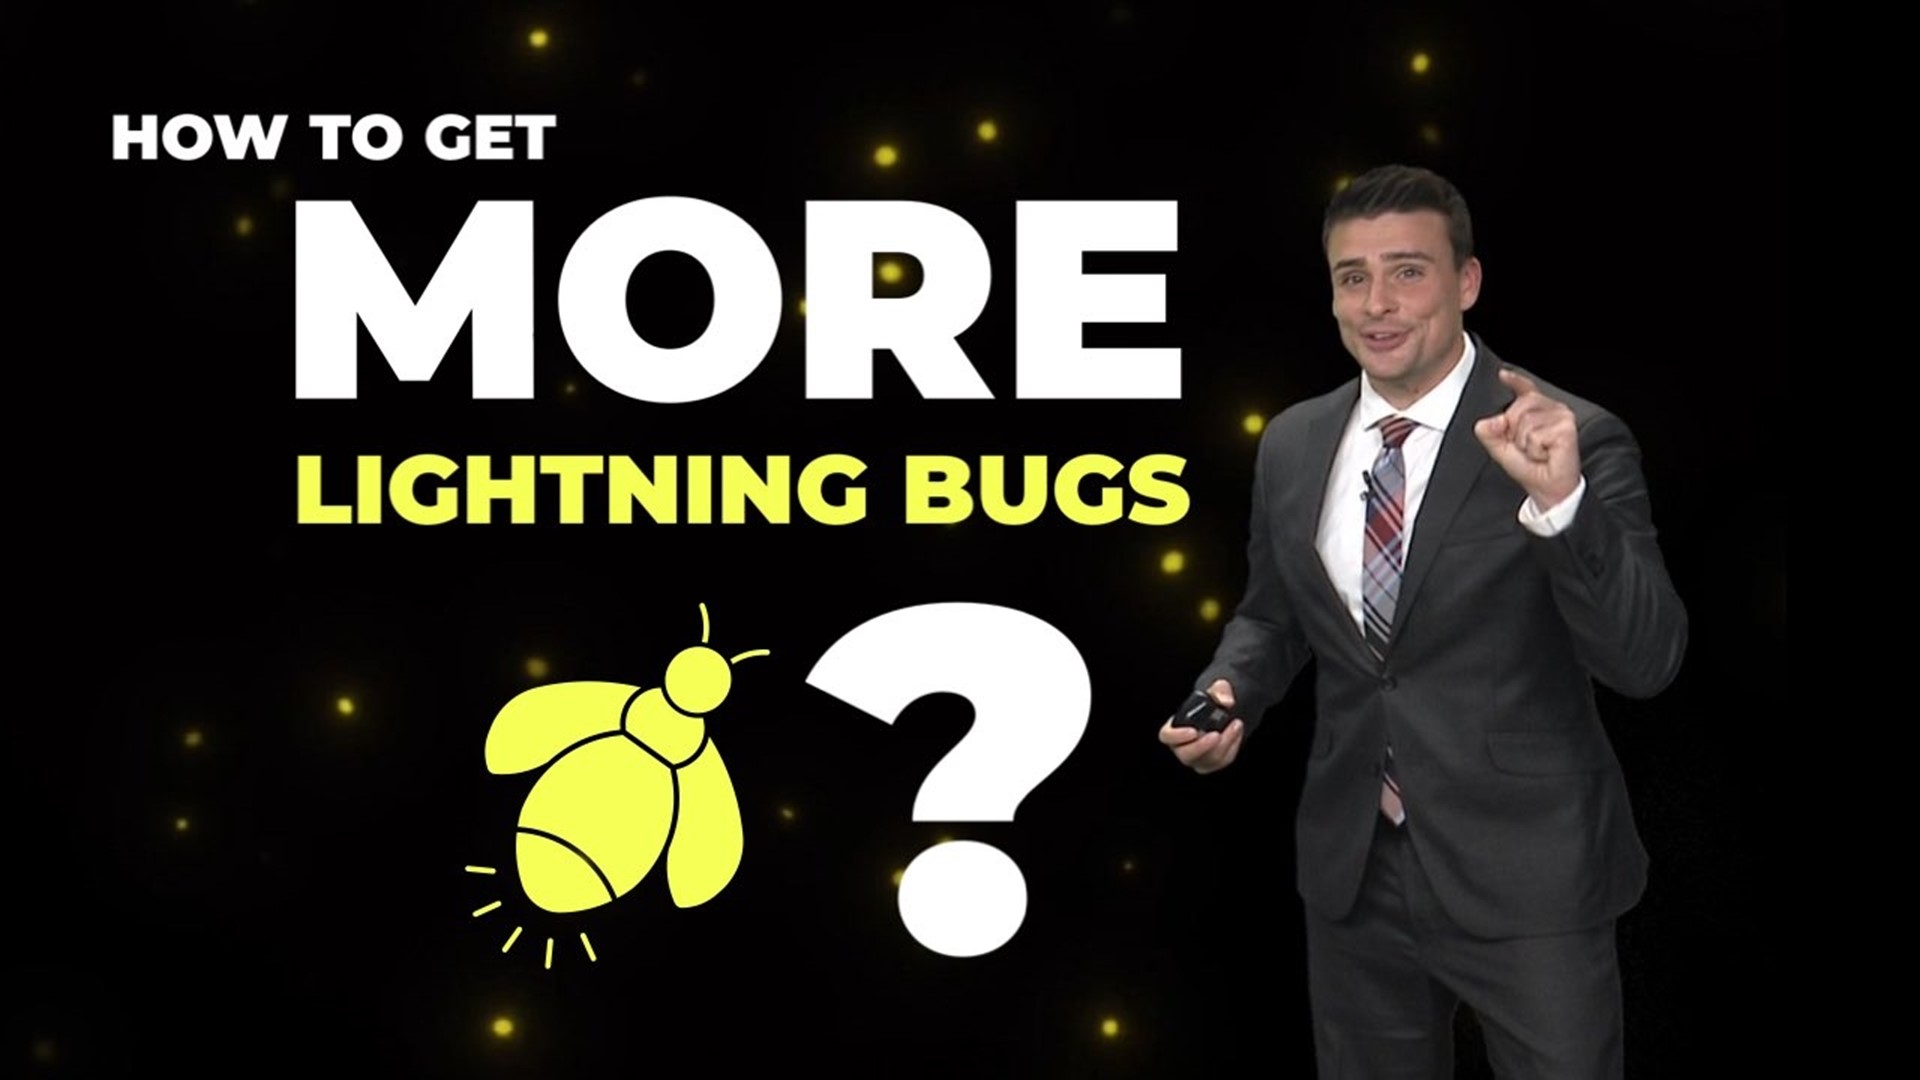 Many people are reporting fewer lightning bugs and fireflies in their backyards. There are some steps you can take to help bring more to your neighborhood.